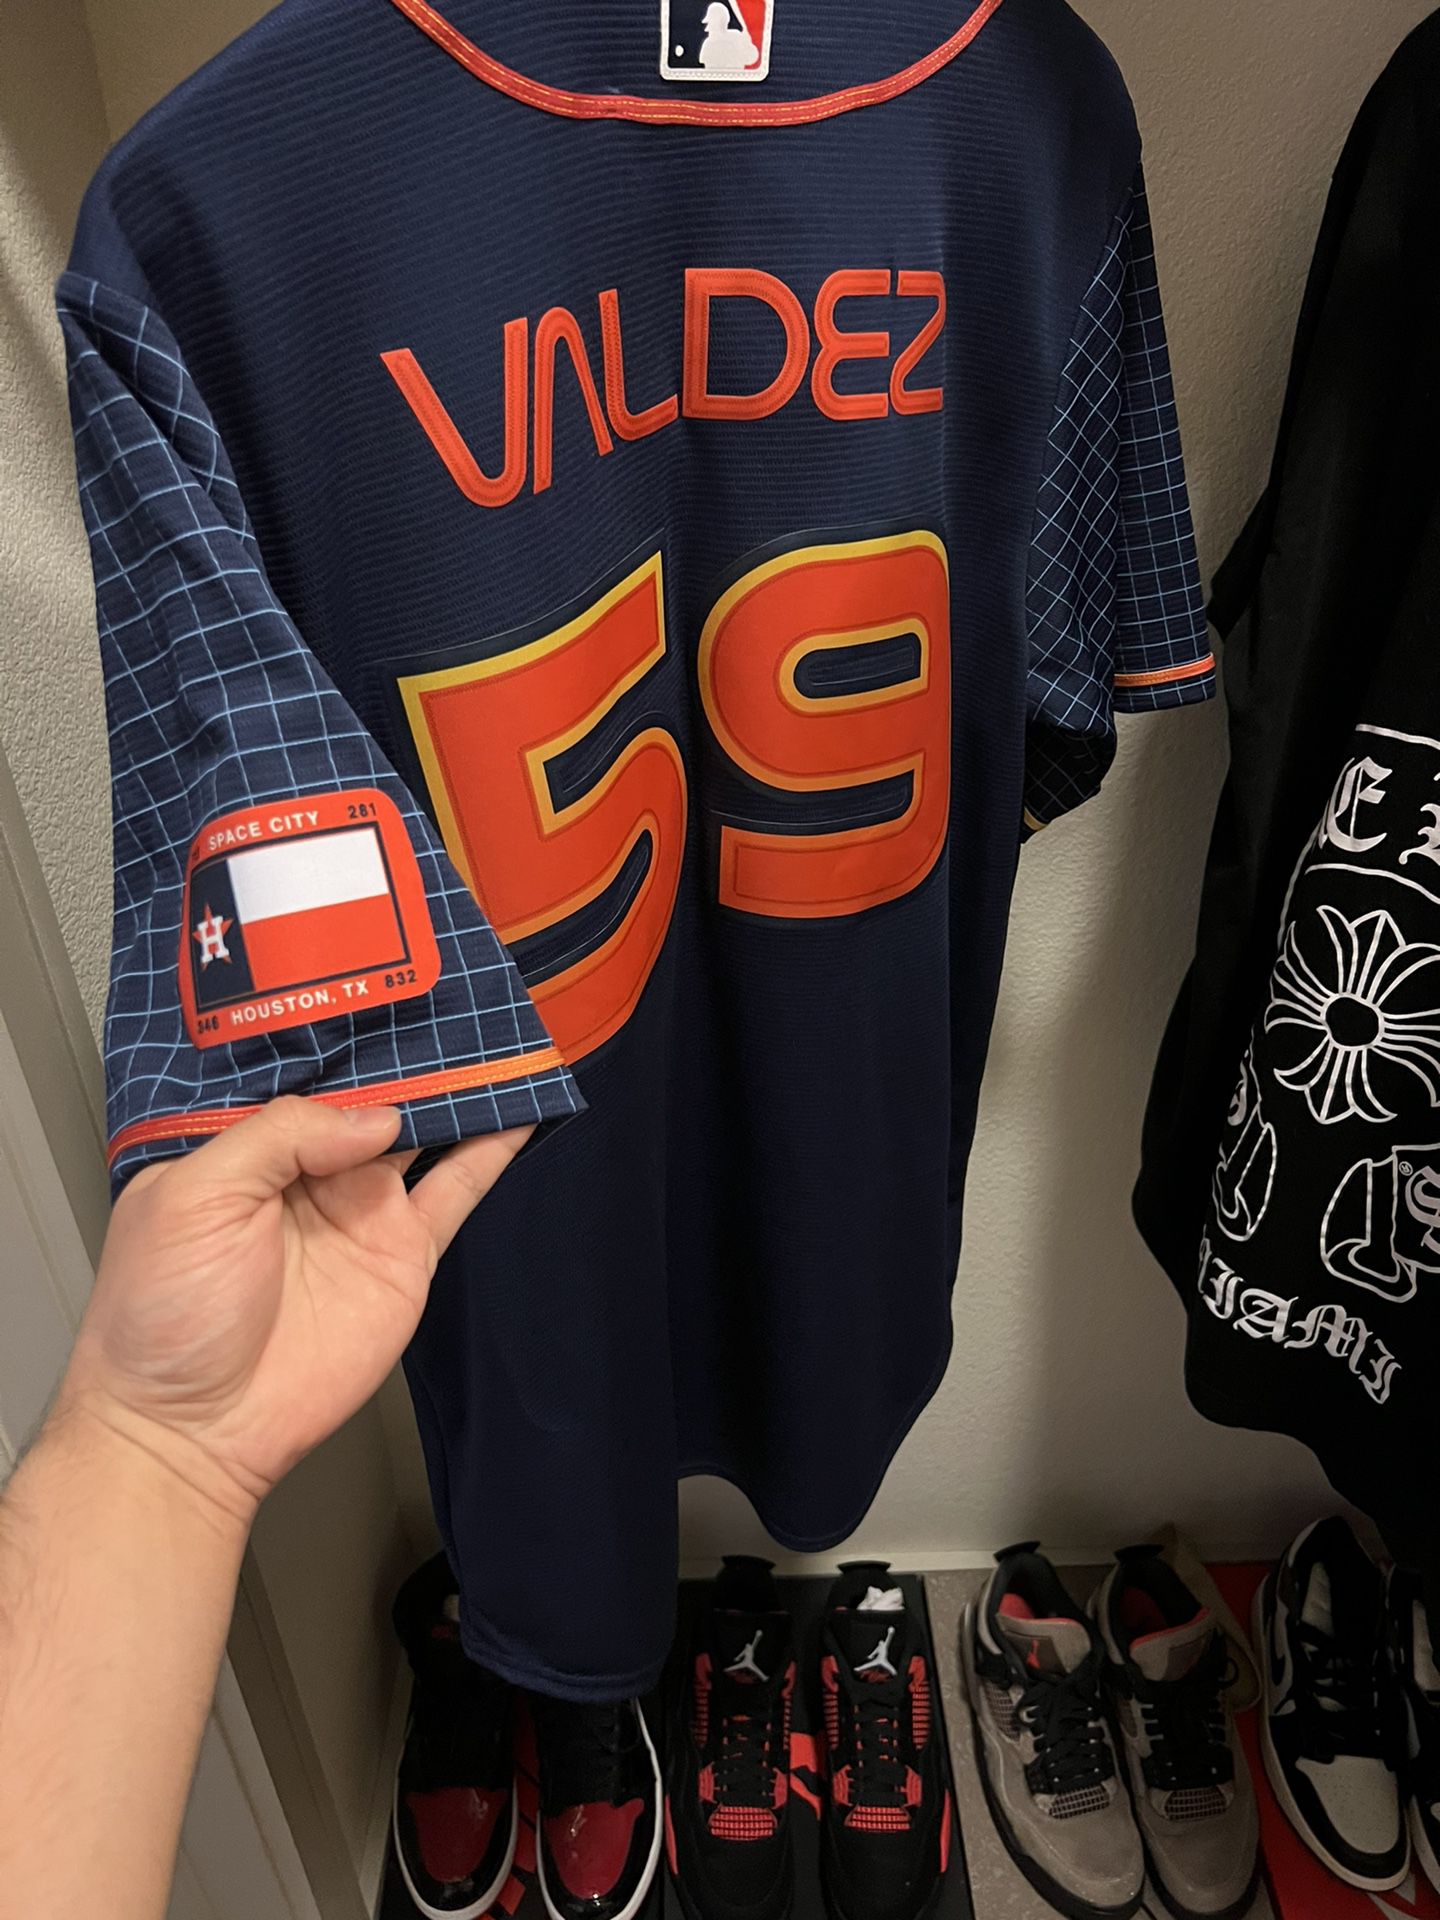 Space city Houston Astros Jersey Men's small for Sale in Houston, TX -  OfferUp